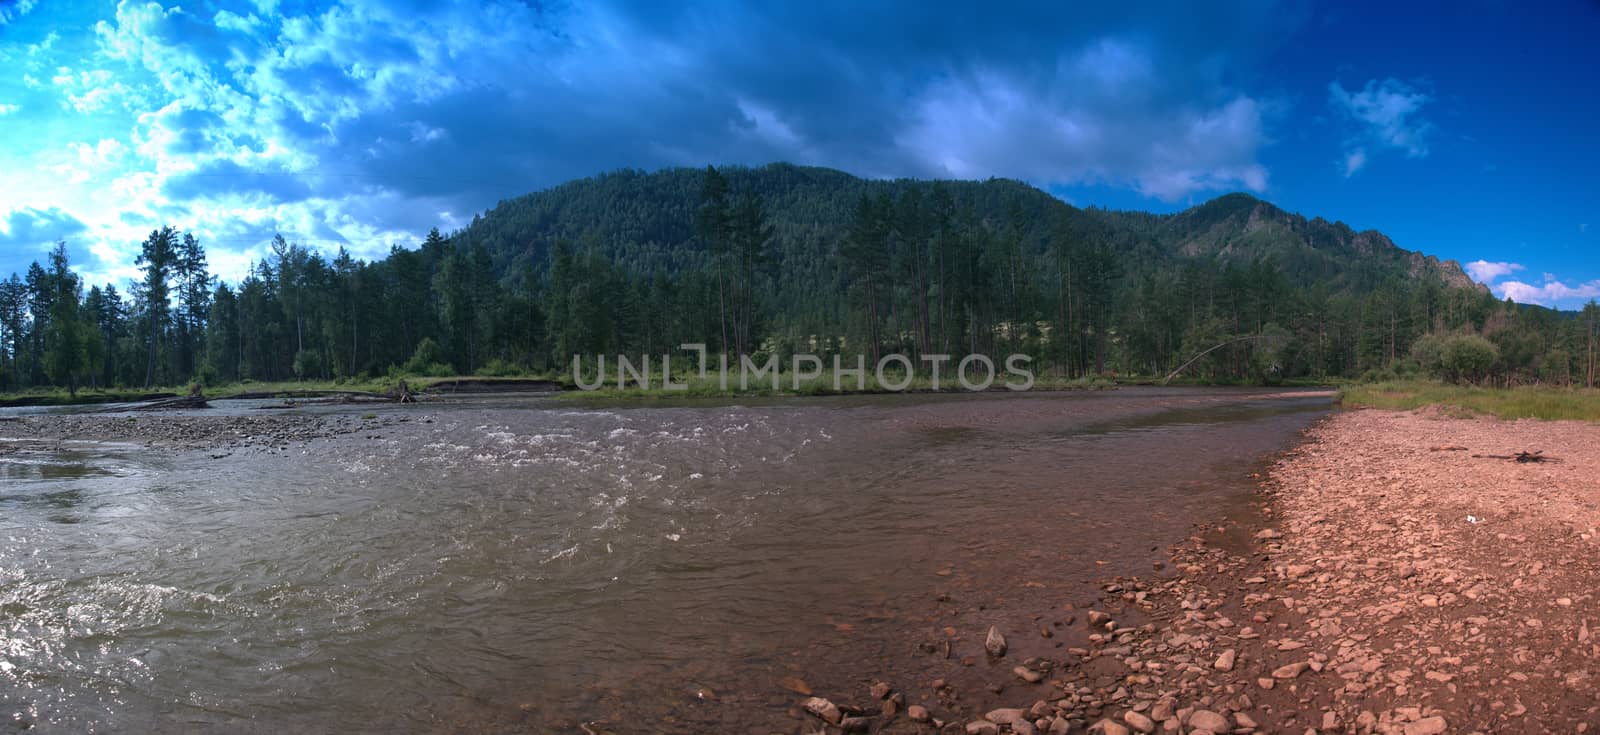 Panoramic picture of the Ursul River flowing at the foot of the mountain ranges. Altai, Siberia, Russia. Landscape. by alexey_zheltukhin